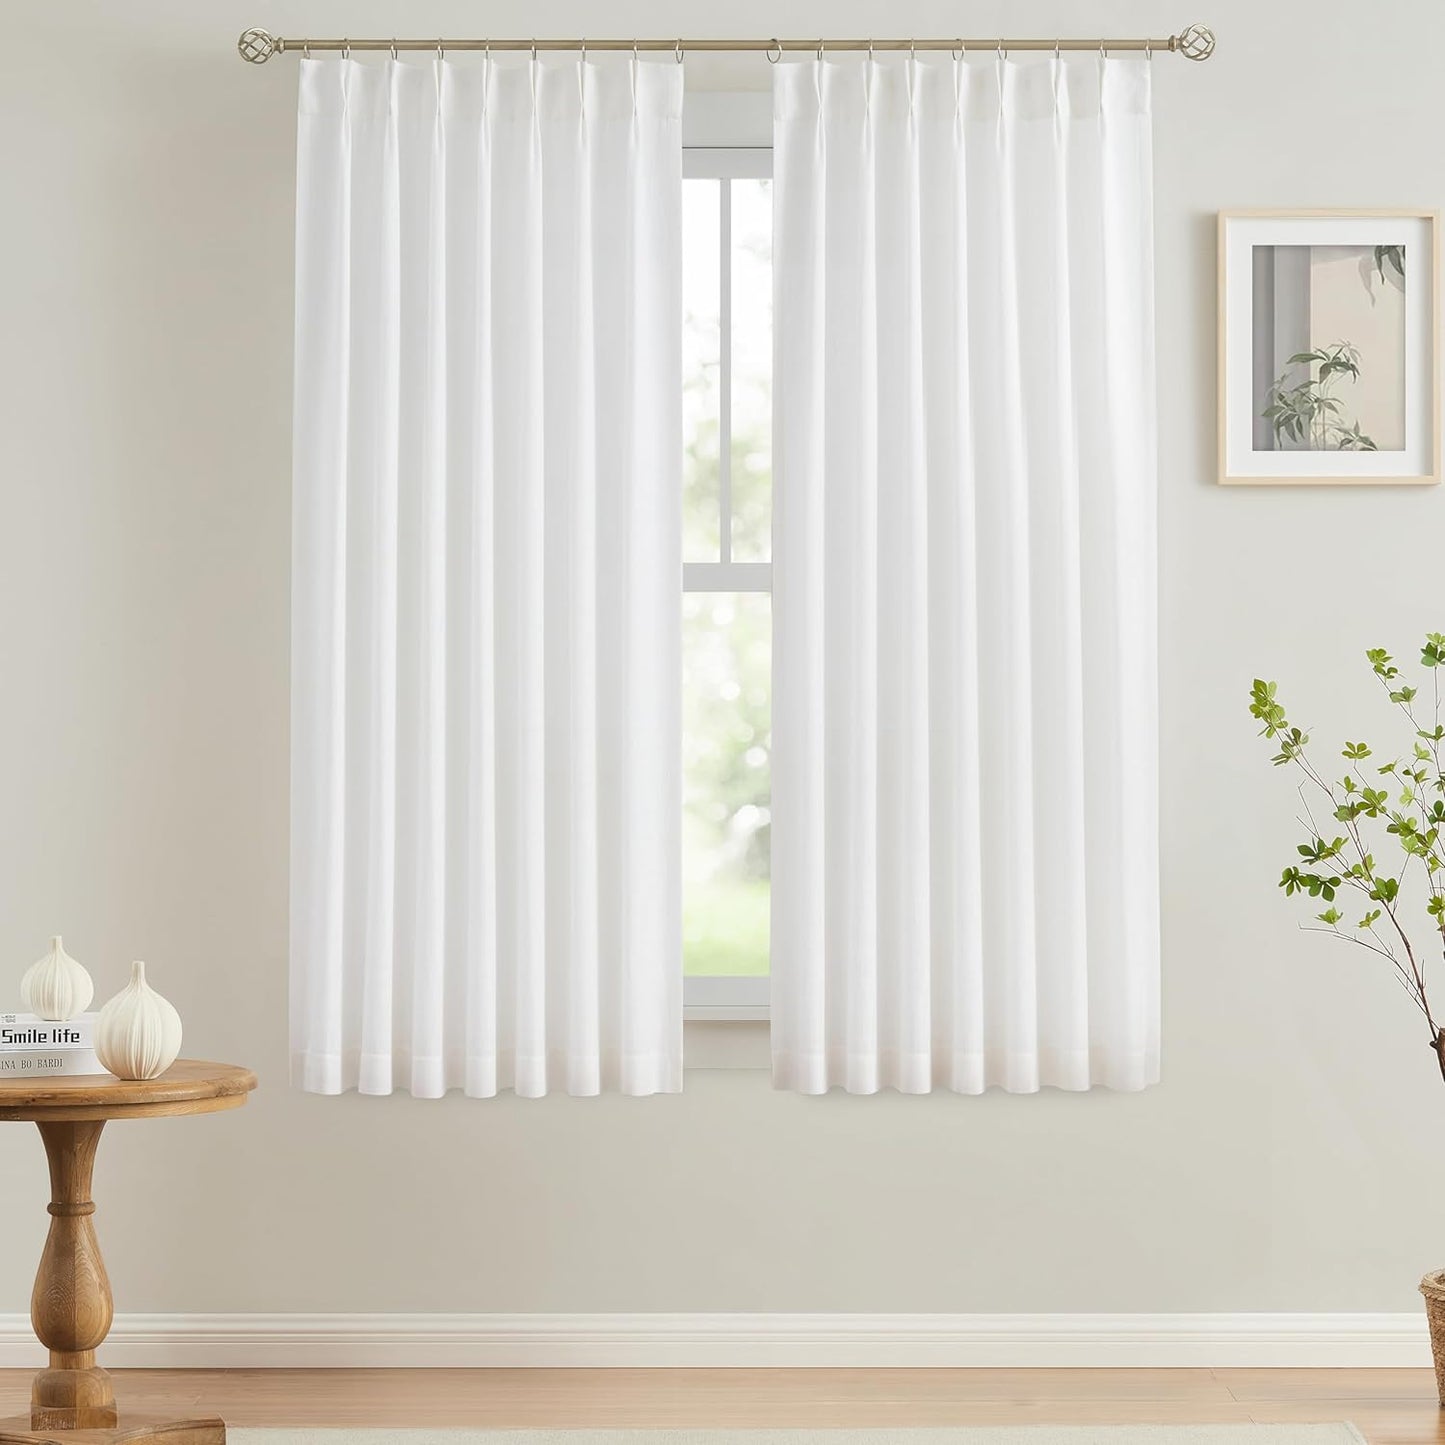 Vision Home Natural Pinch Pleated Semi Sheer Curtains Textured Linen Blended Light Filtering Window Curtains 84 Inch for Living Room Bedroom Pinch Pleat Drapes with Hooks 2 Panels 42" Wx84 L  Vision Home White/Pinch 40"X72"X2 